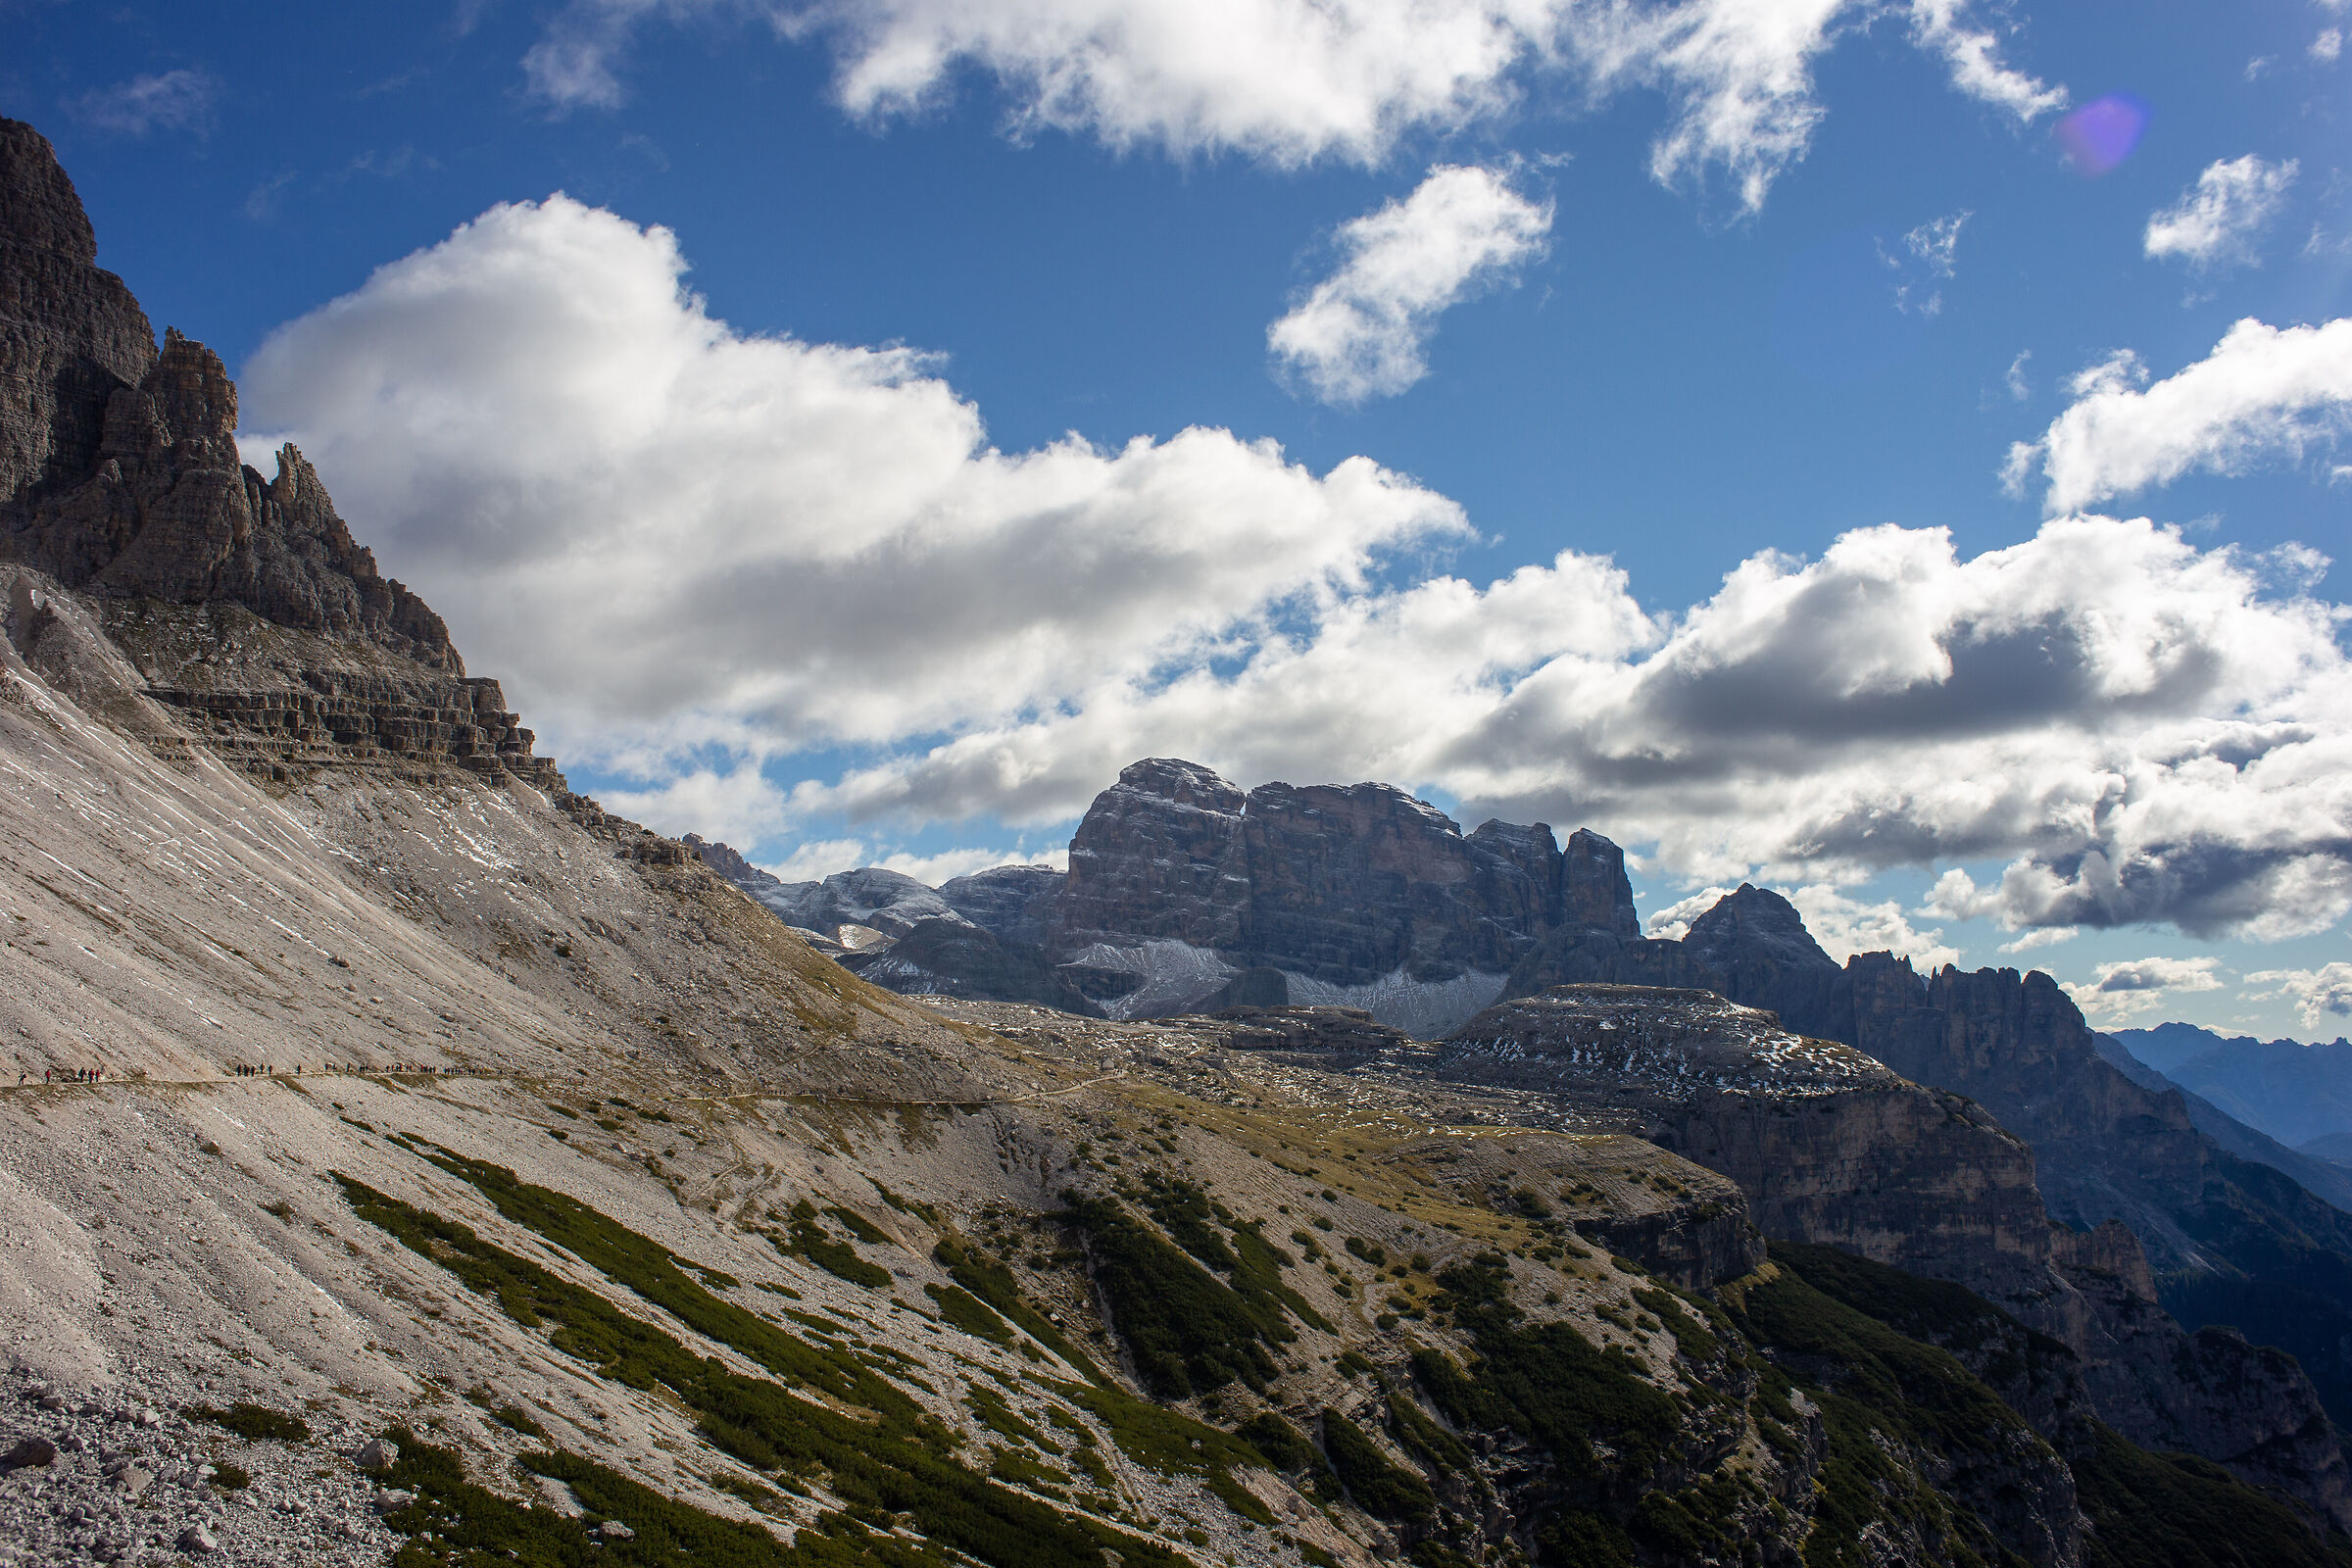 View from the Three Peaks of Lavaredo...